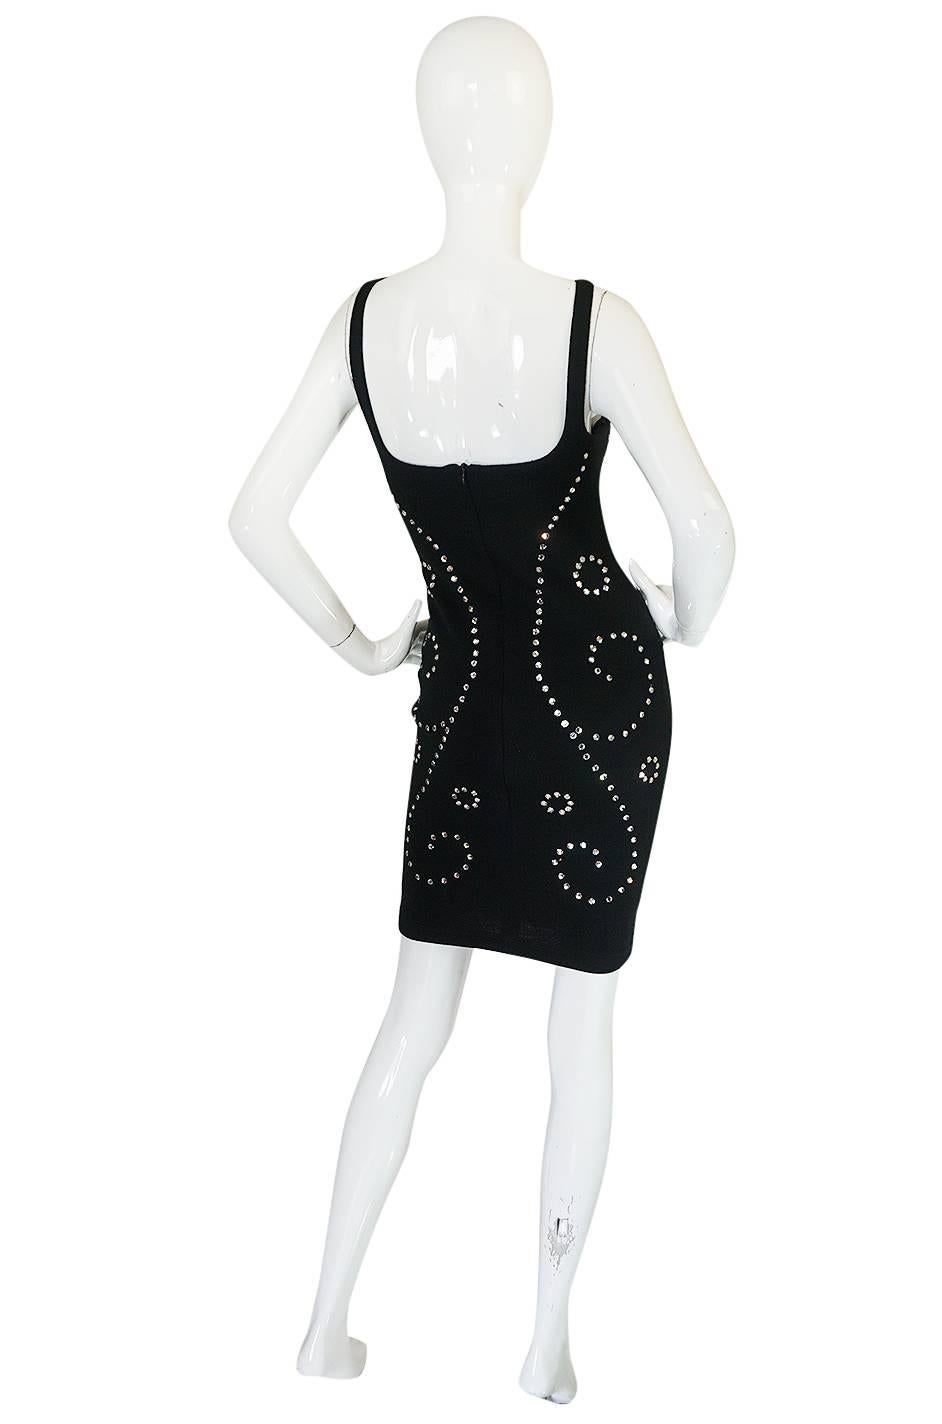 Looking like it just came straight from the 1990s catwalk comes this iconic rhinestone encrusted dress by New York design phenomenon Todd Oldham. It is a super sexy little black knit number that fits and hugs your every curve. it is made of a